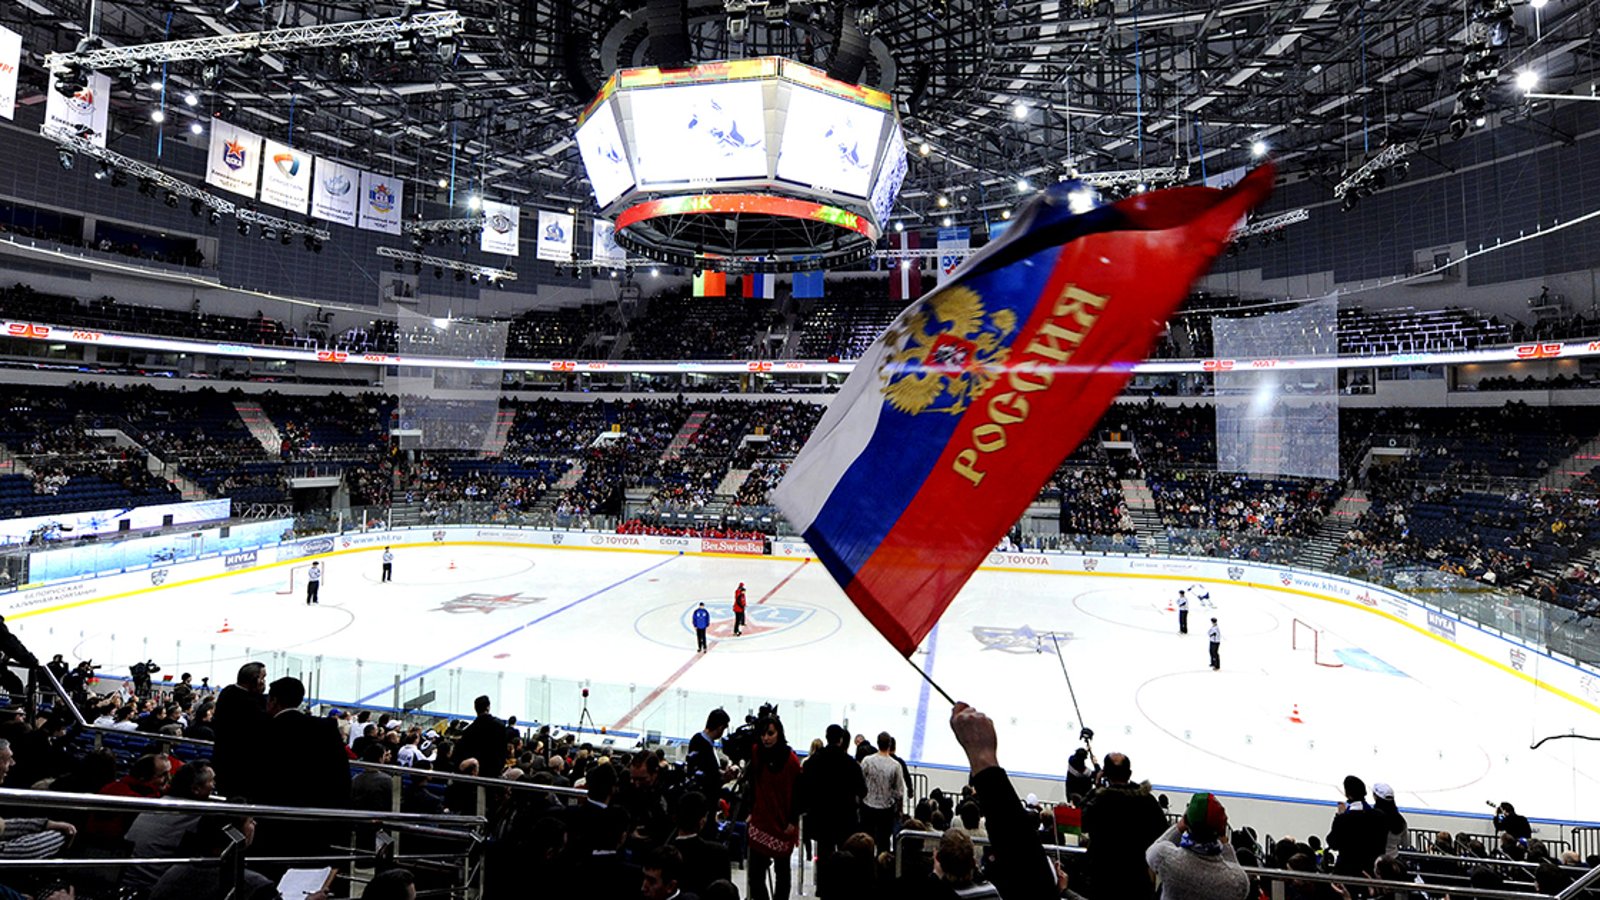 Breaking: Another Russian cut and headed back to KHL